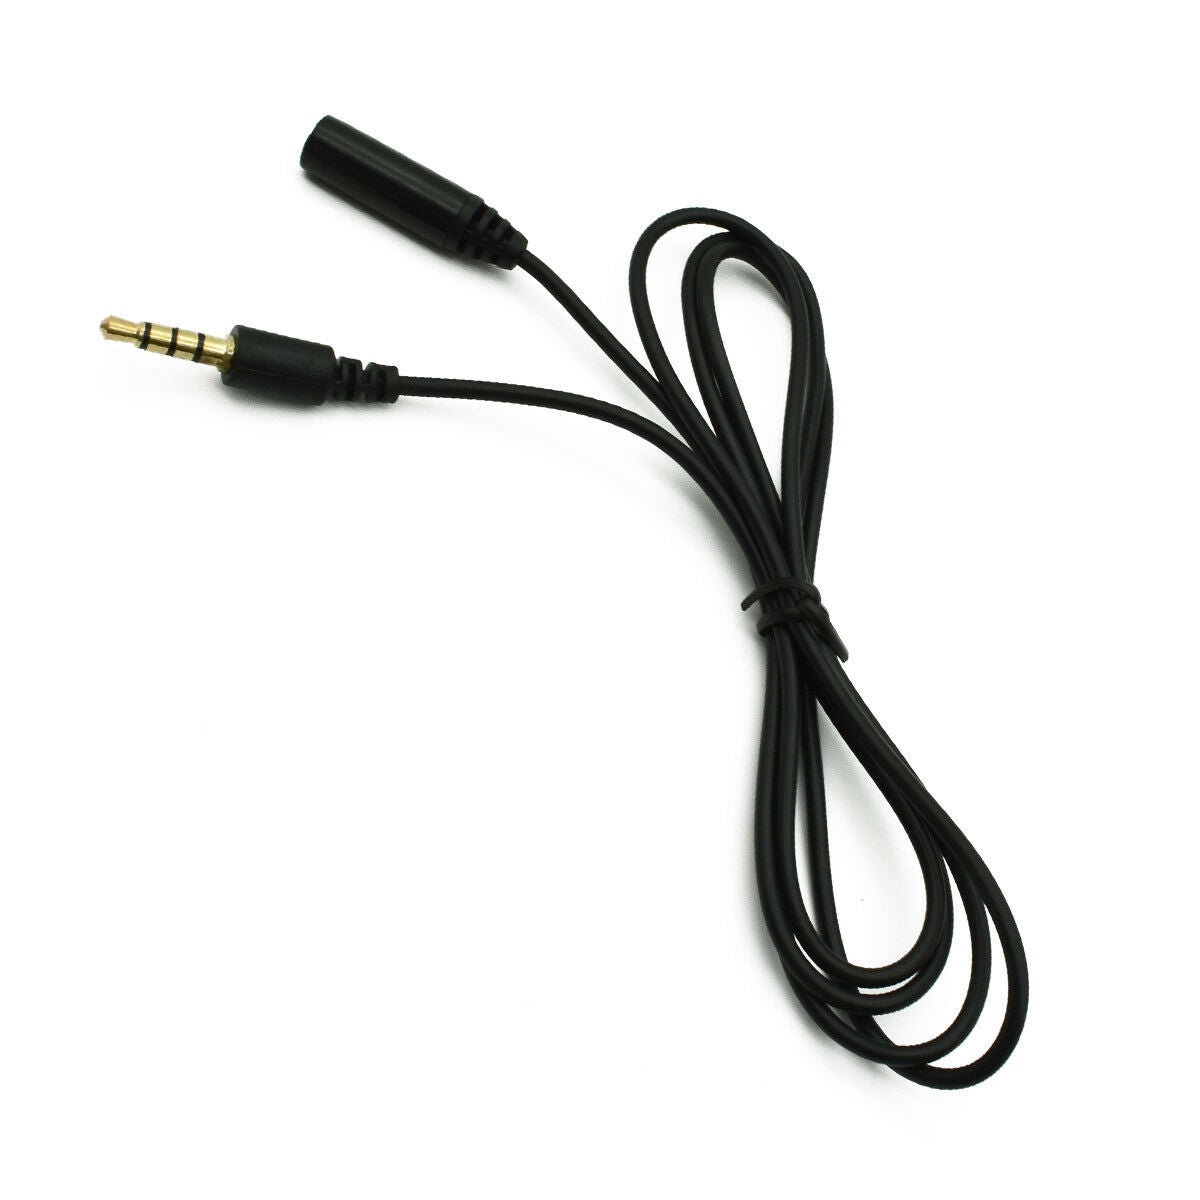 4-Pole 3Ring TRRS 3.5mm (1/8'') Male To Female AV Extension Cable 3FT/1M